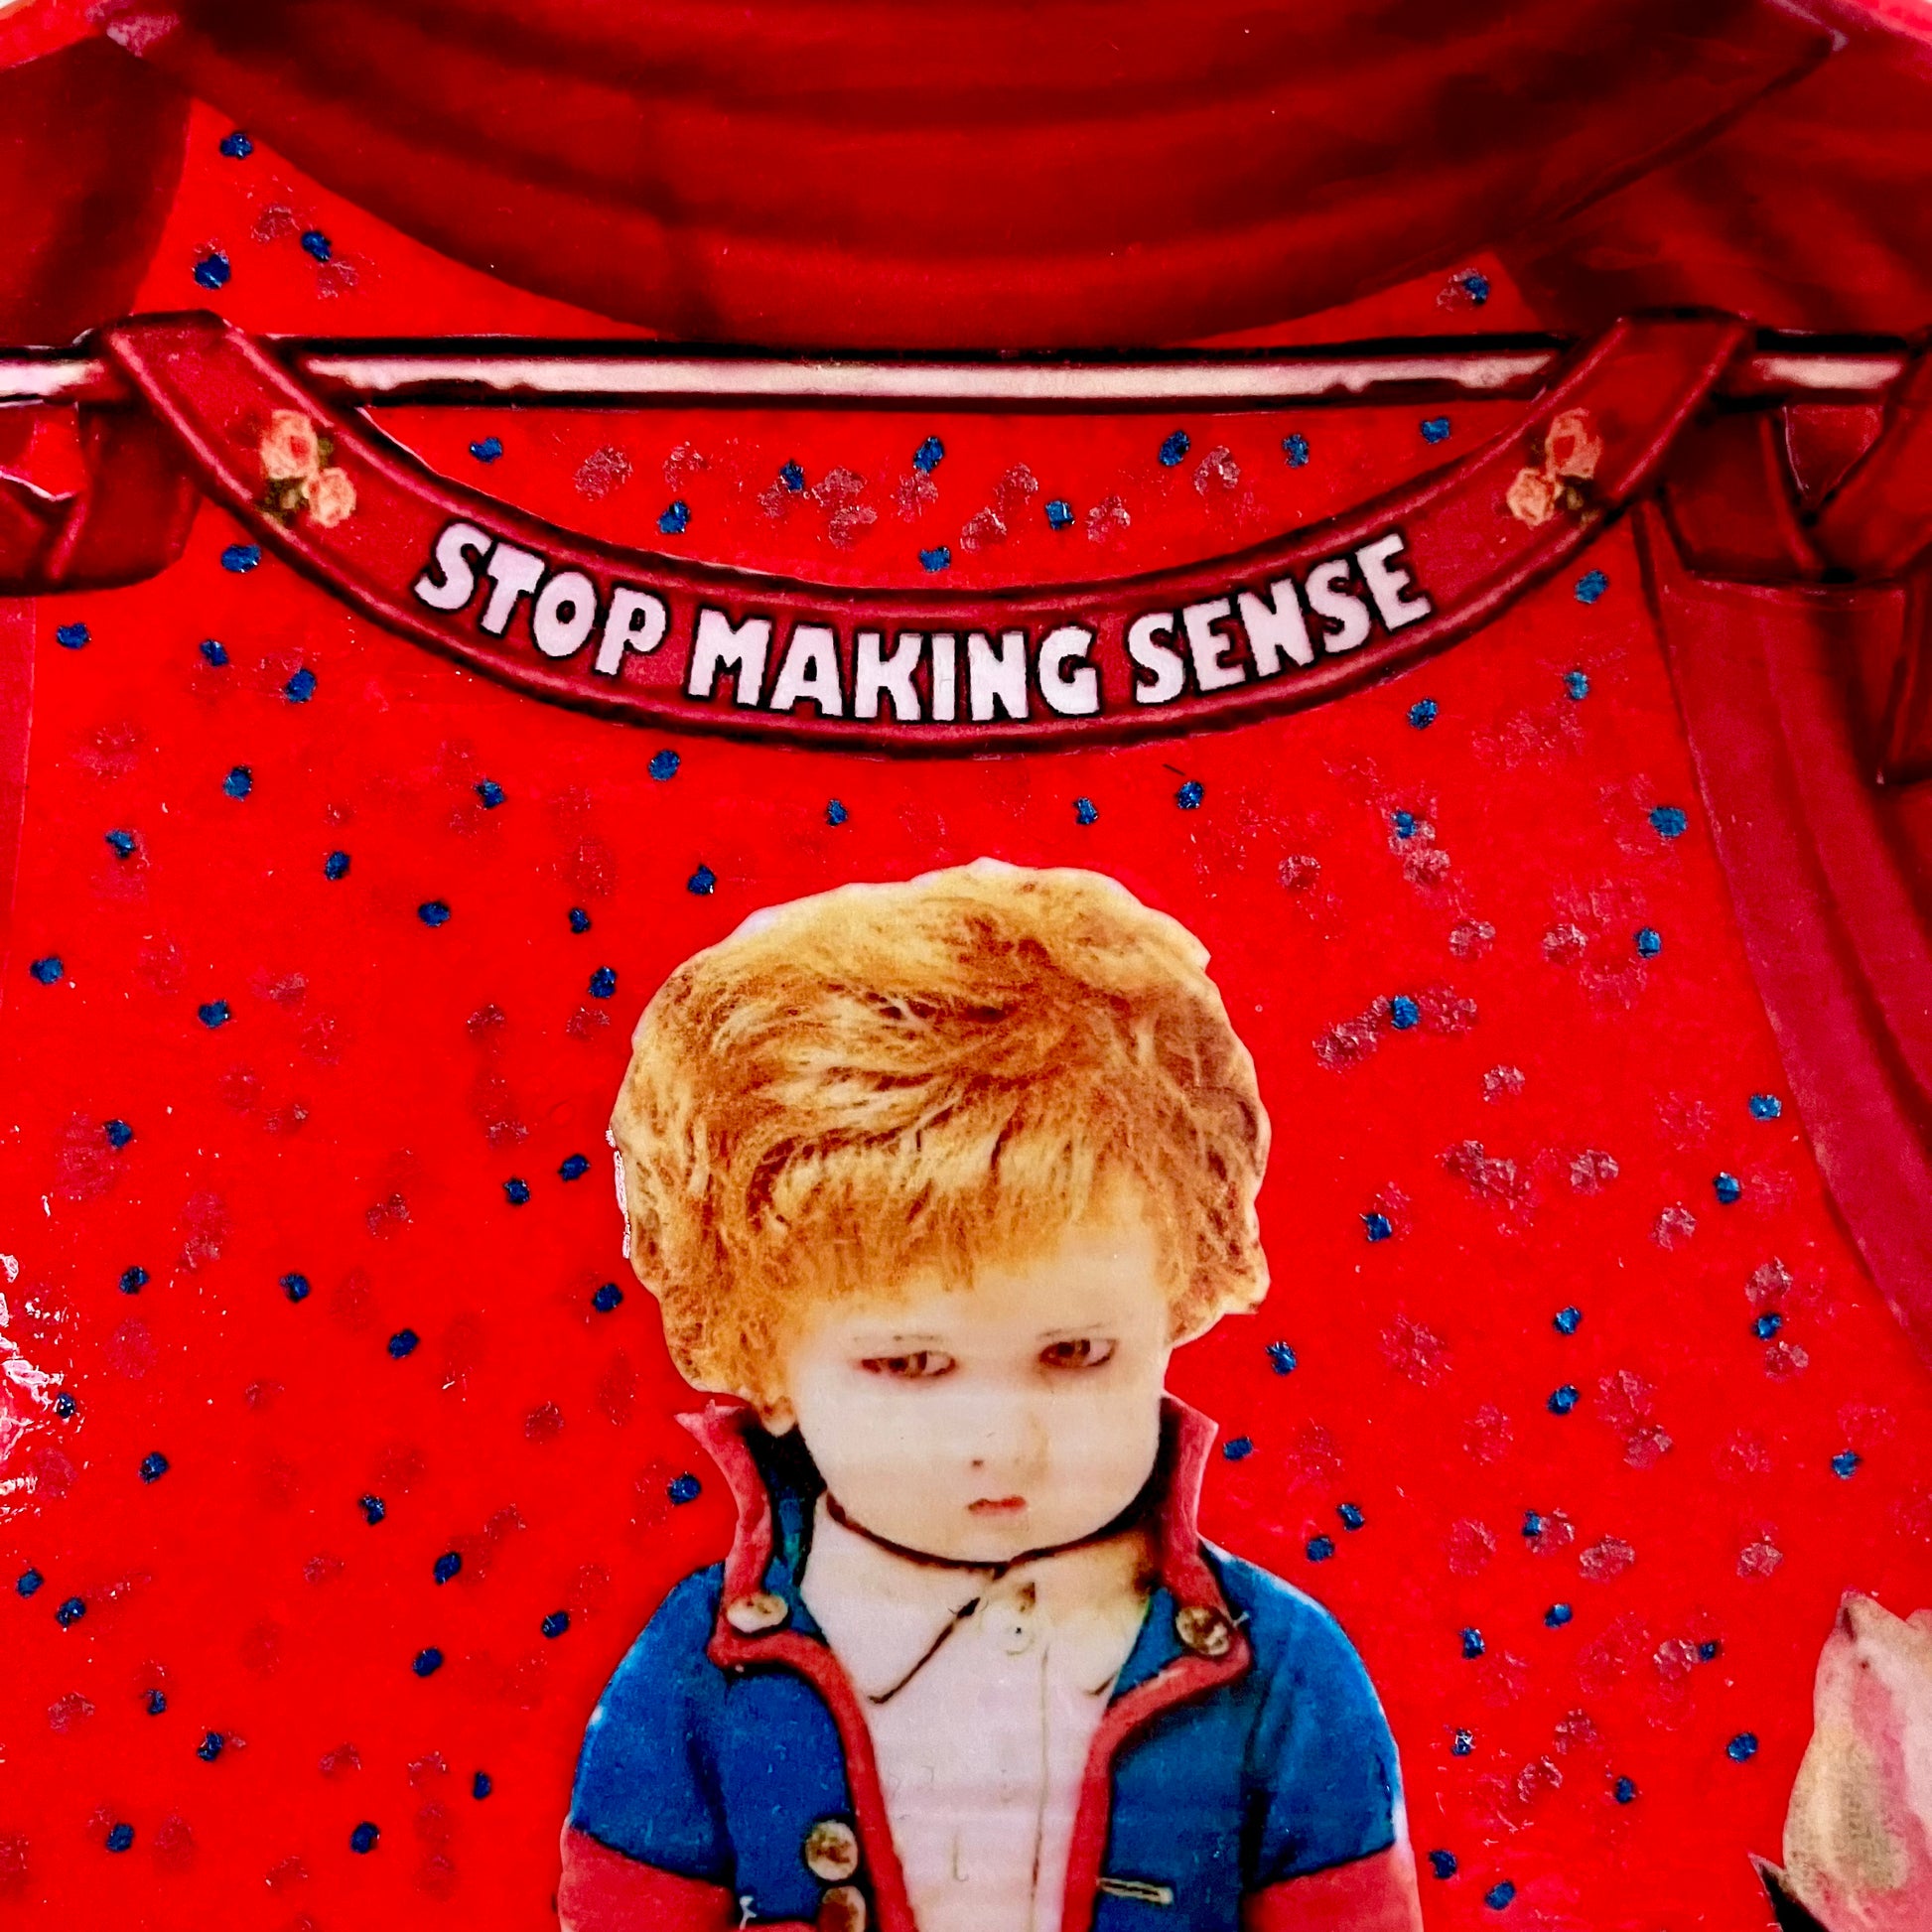 "Stop Making Sense" Wall Plate by House of Frisson, closeup detail of the collage showing a felt male doll and red curtains.